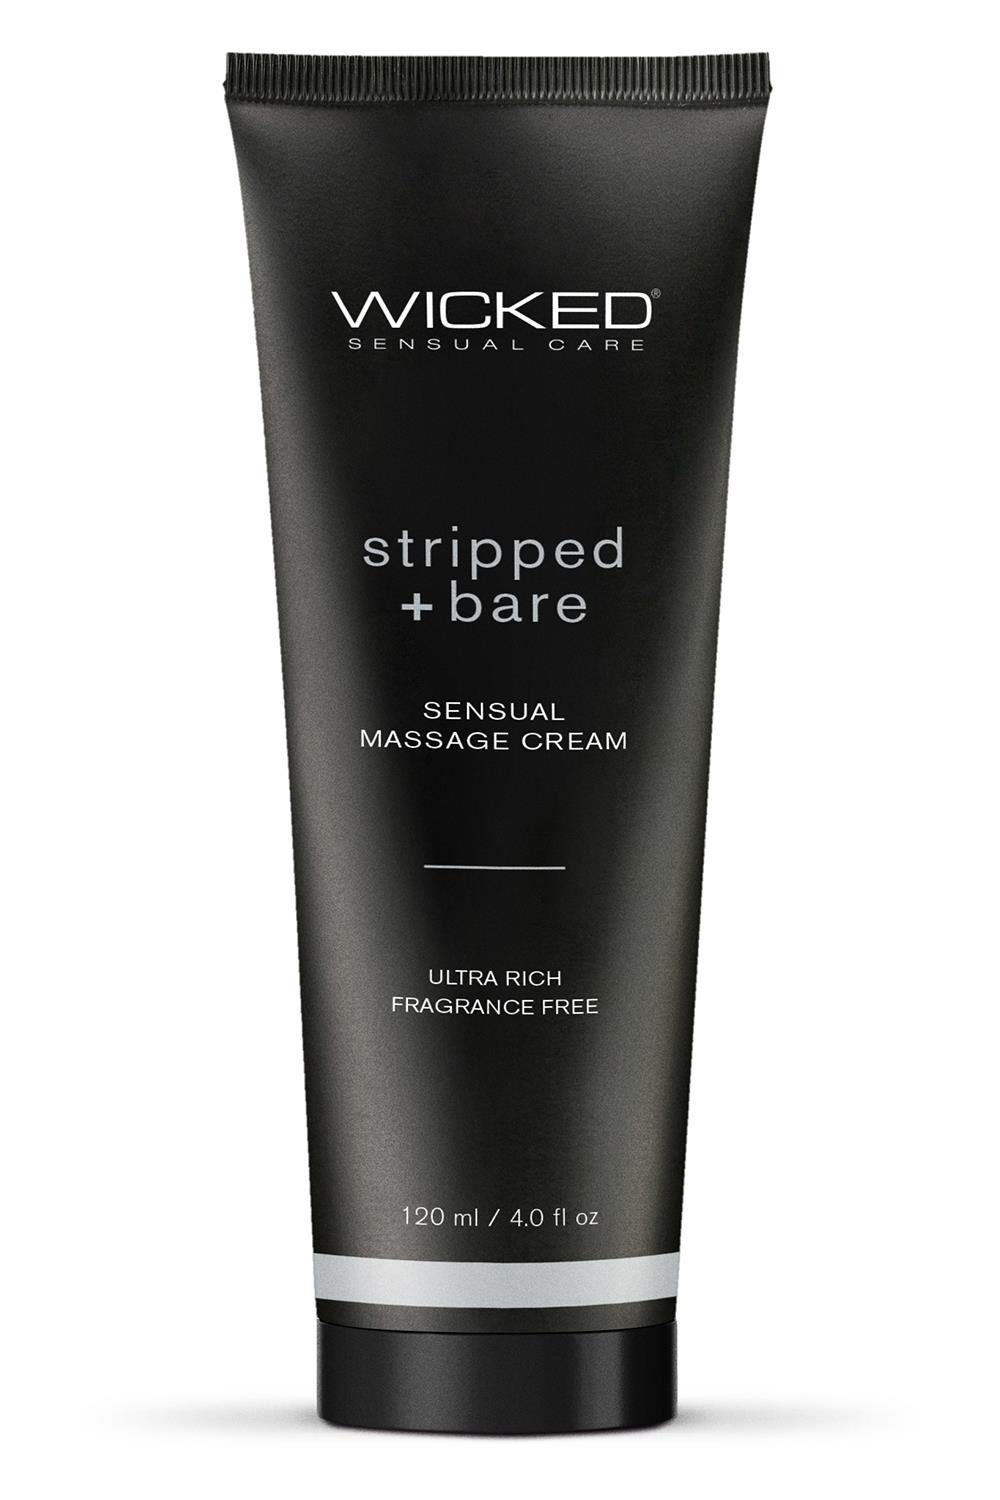 Sensual Stripped Unscented Massage Gleitgel Wicked 120ml Cream And Bare Wicked